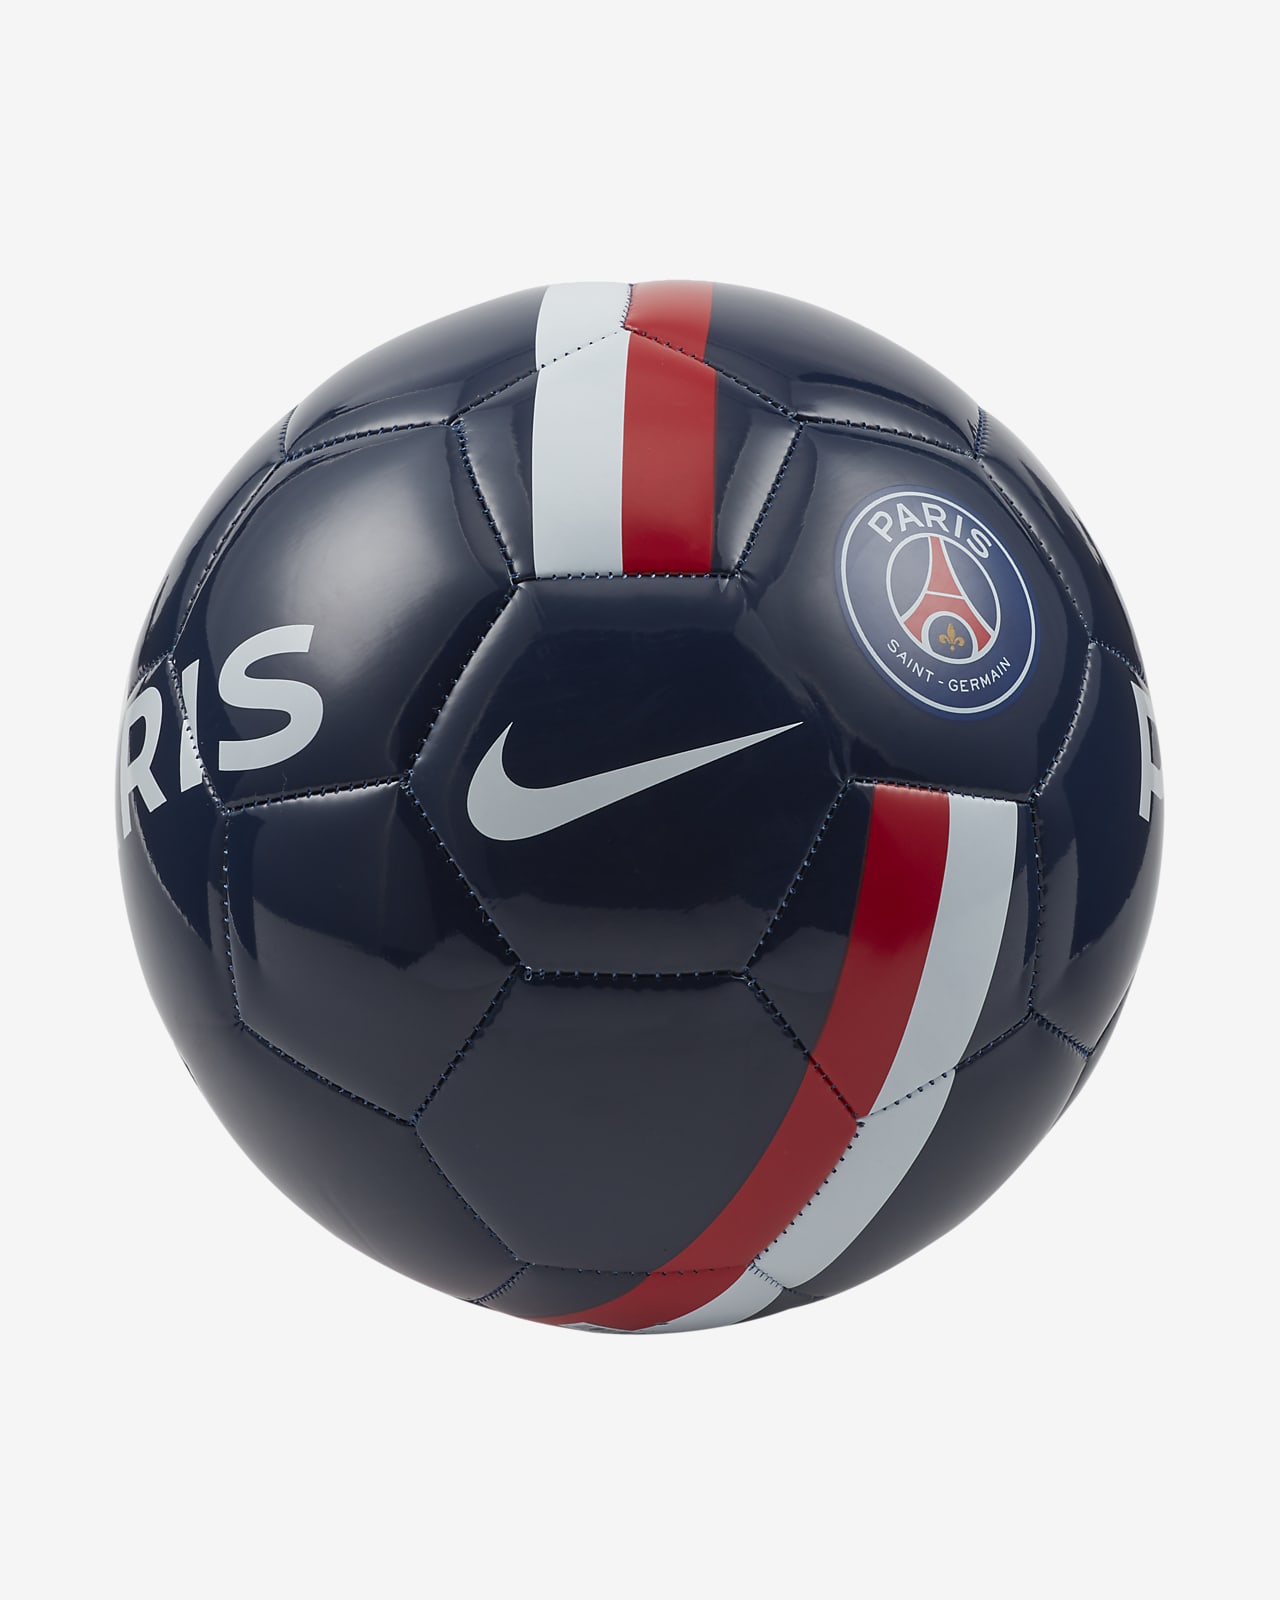 Psg Supporters Football Nike Ae